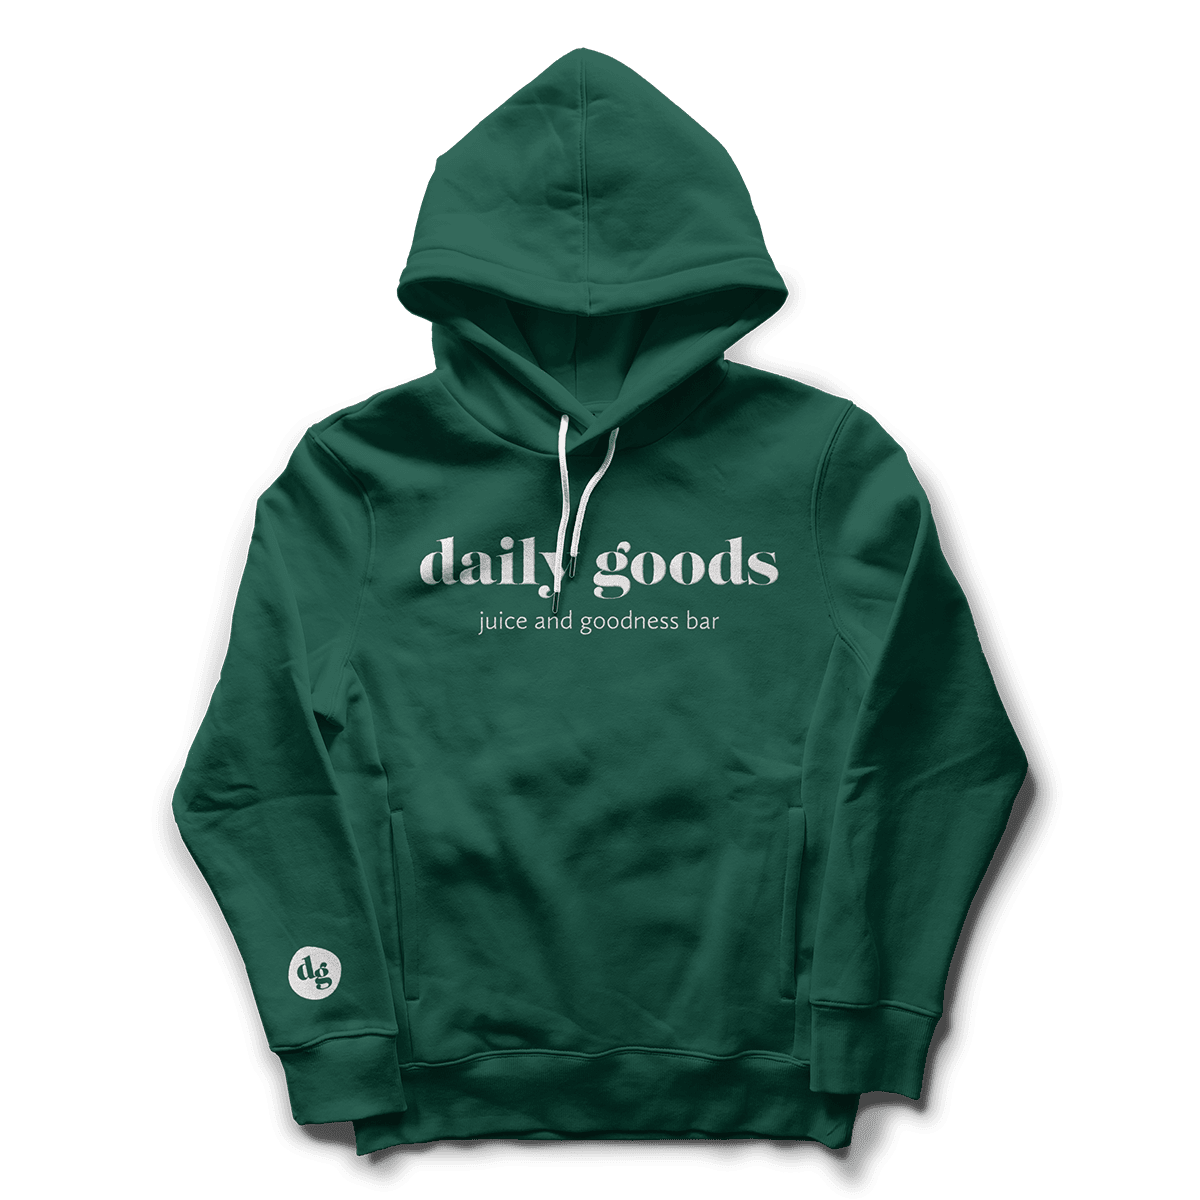 Mockup of Daily Goods sweater design.